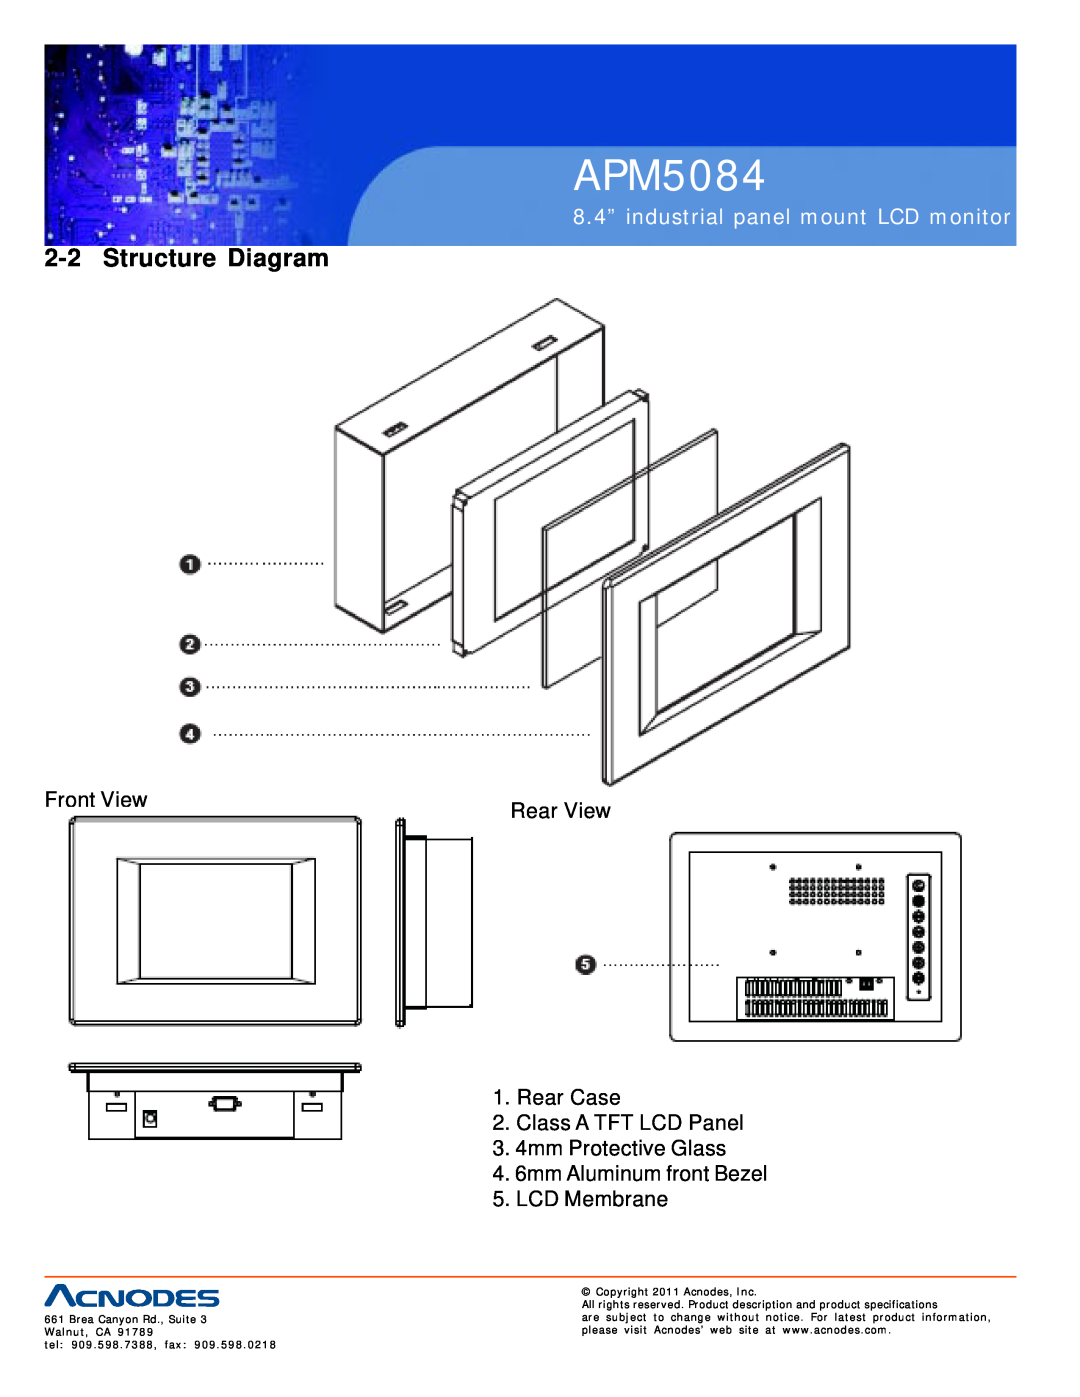 Acnodes APM5084 8.4” industrial panel mount LCD monitor, Brea Canyon Rd., Suite 3 Walnut, CA tel 909.598.7388, fax 